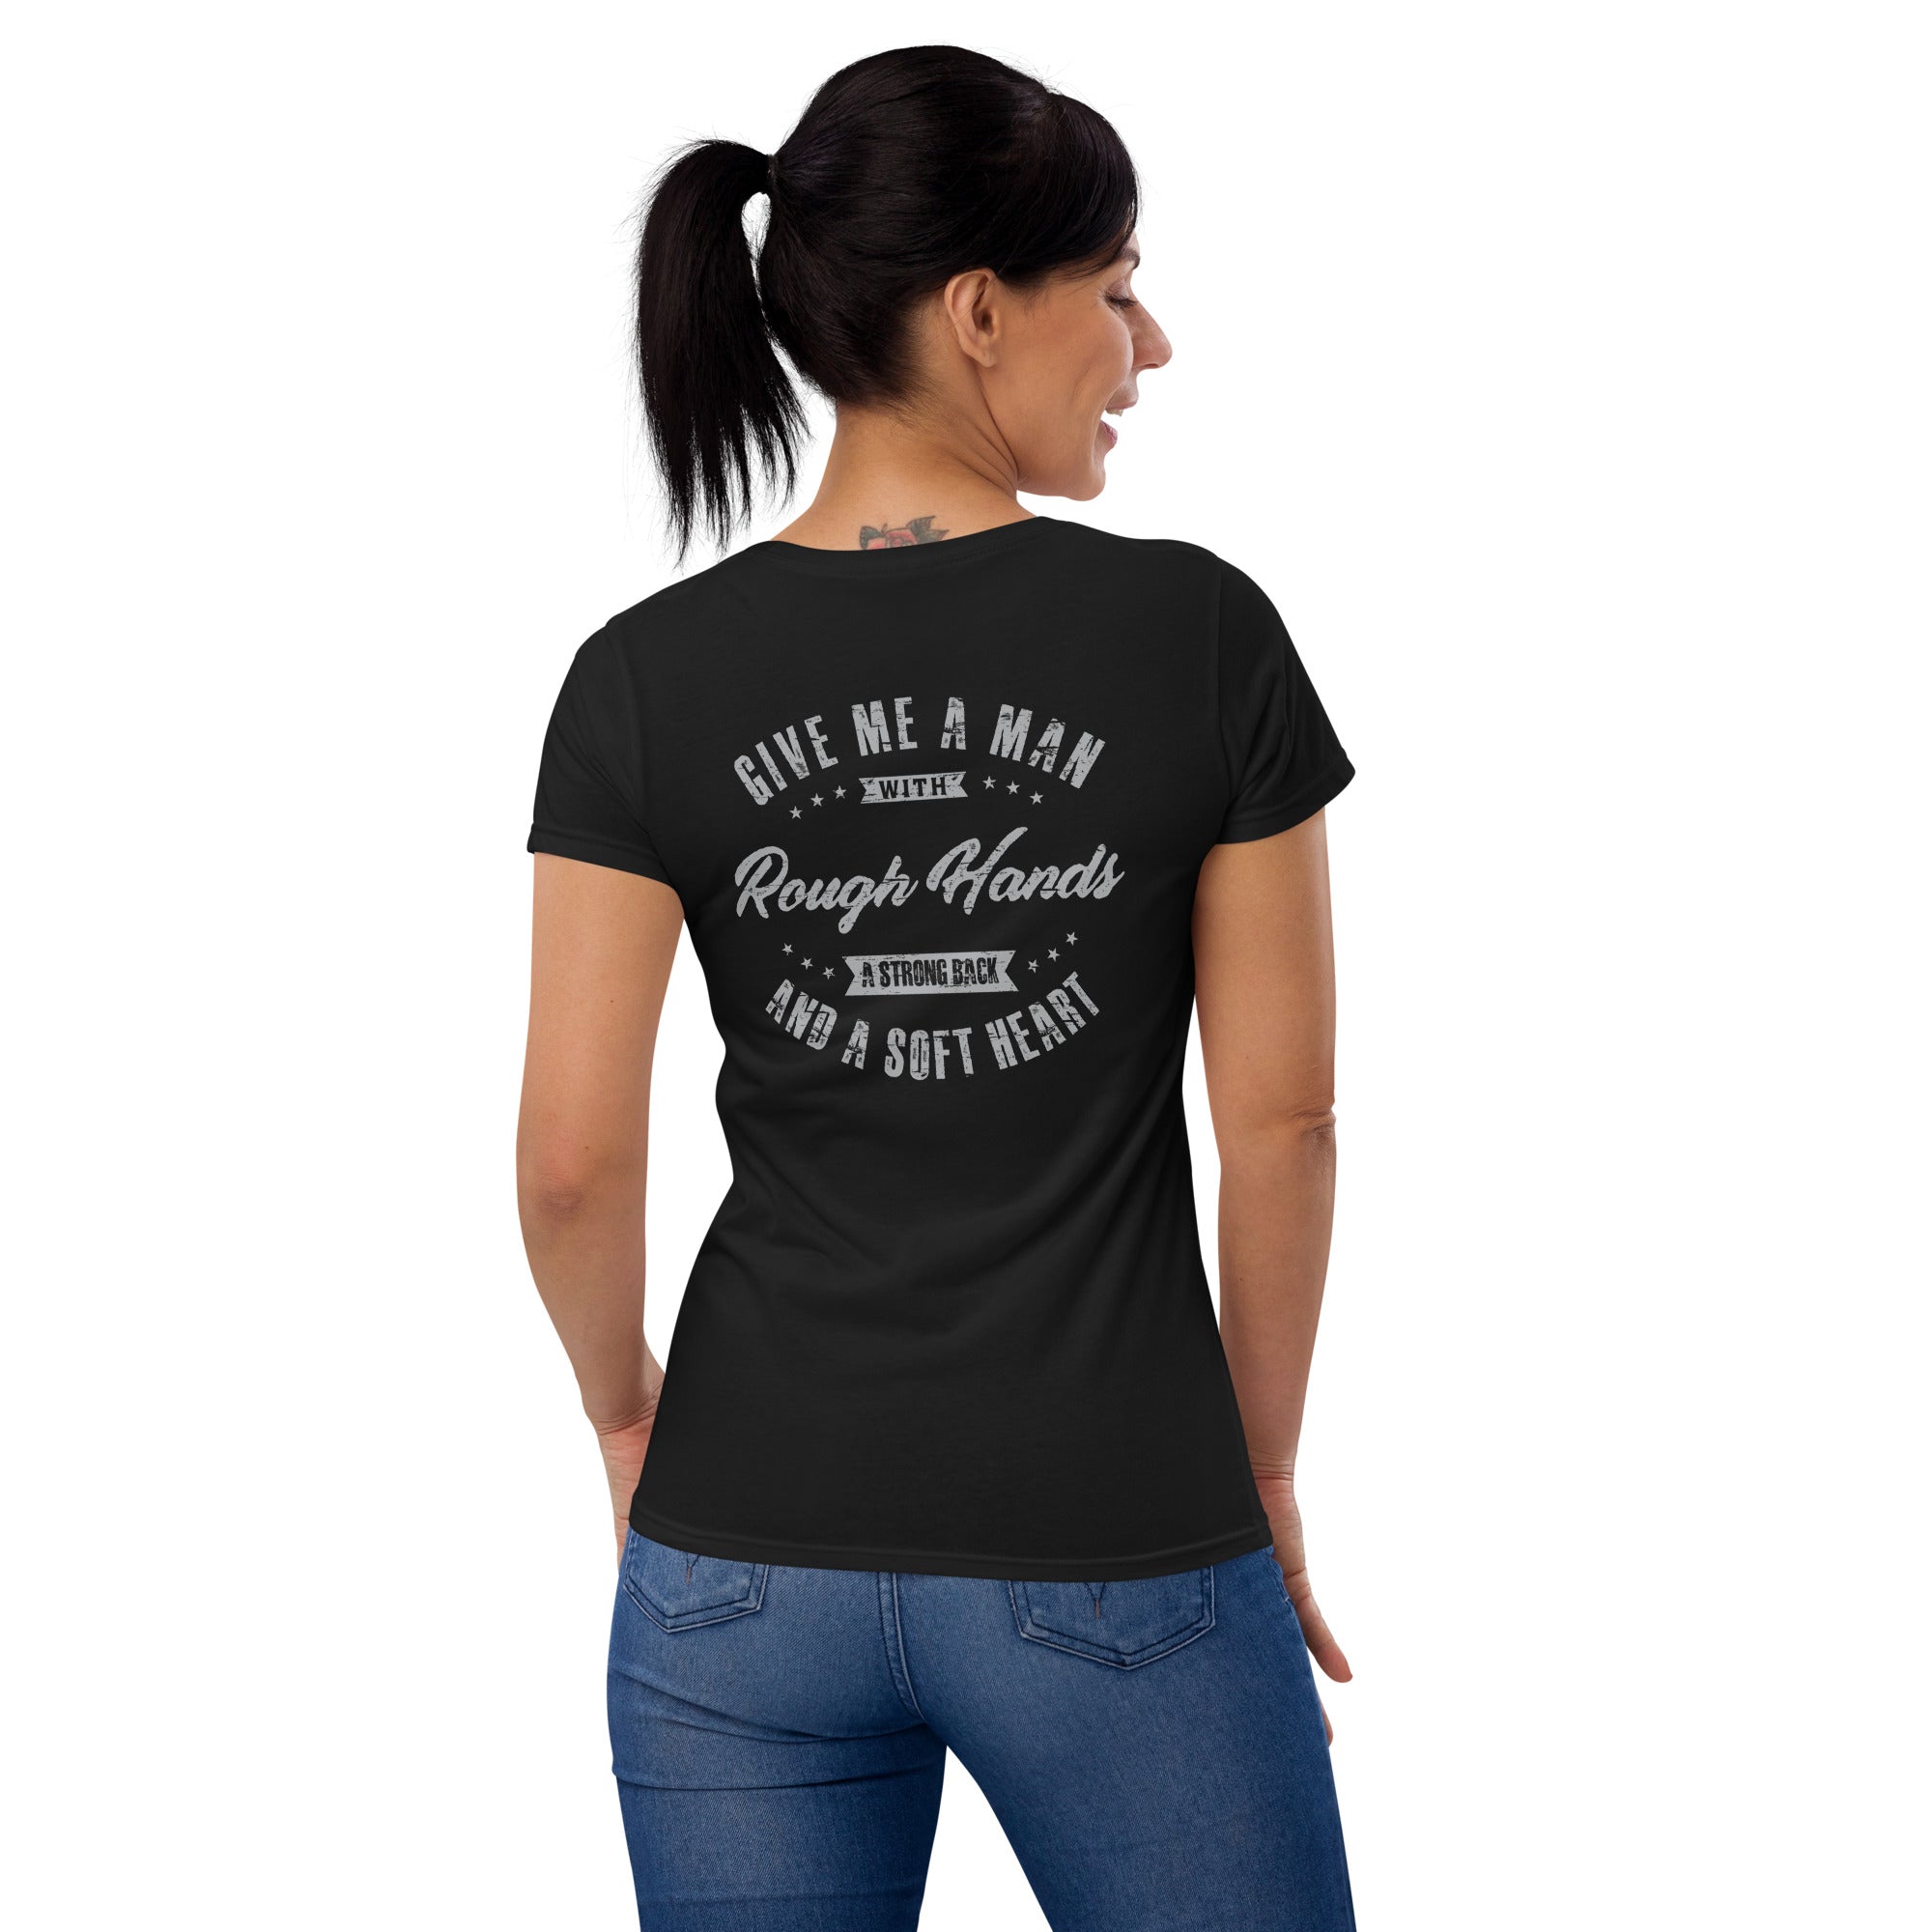 Give me a man with rough hands, a strong back and a soft heart  I  Women's short sleeve t-shirt